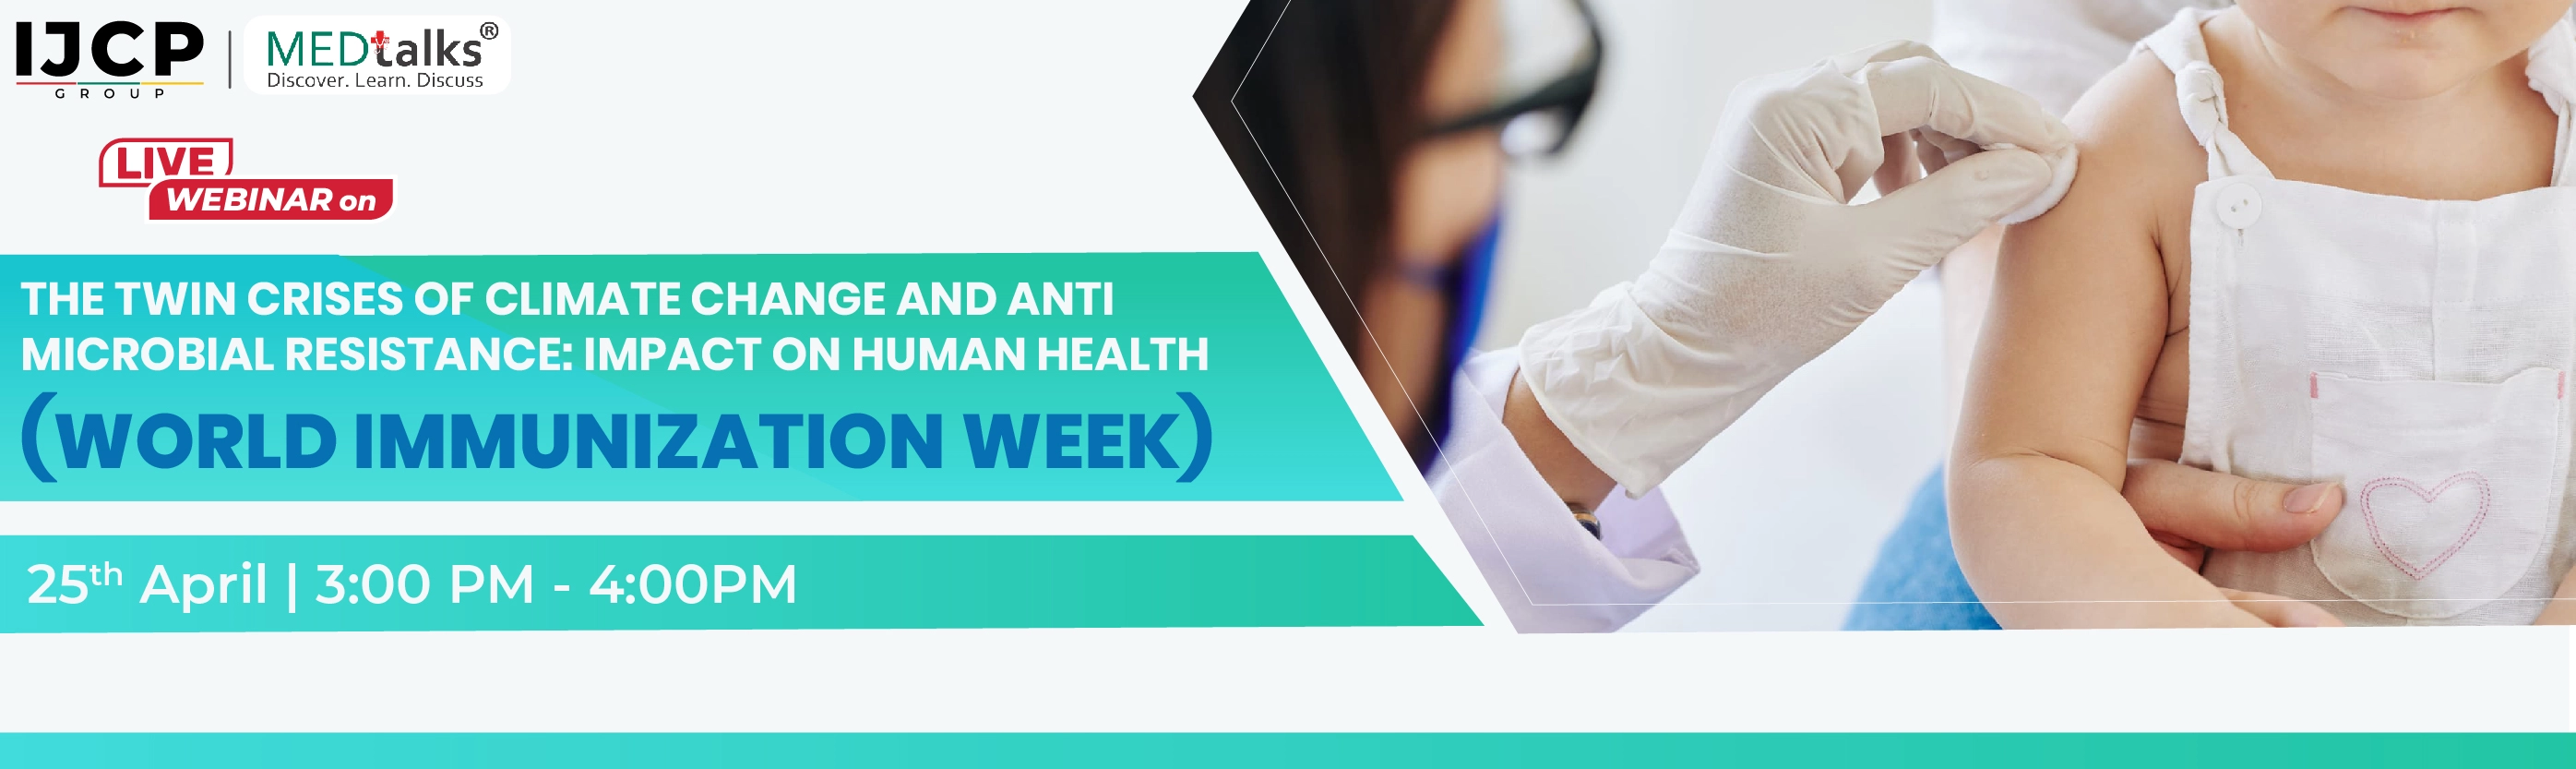 The Twin Crises of Climate Change and Anti Microbial Resistance: Impact on Human health  (World Immunization Week)